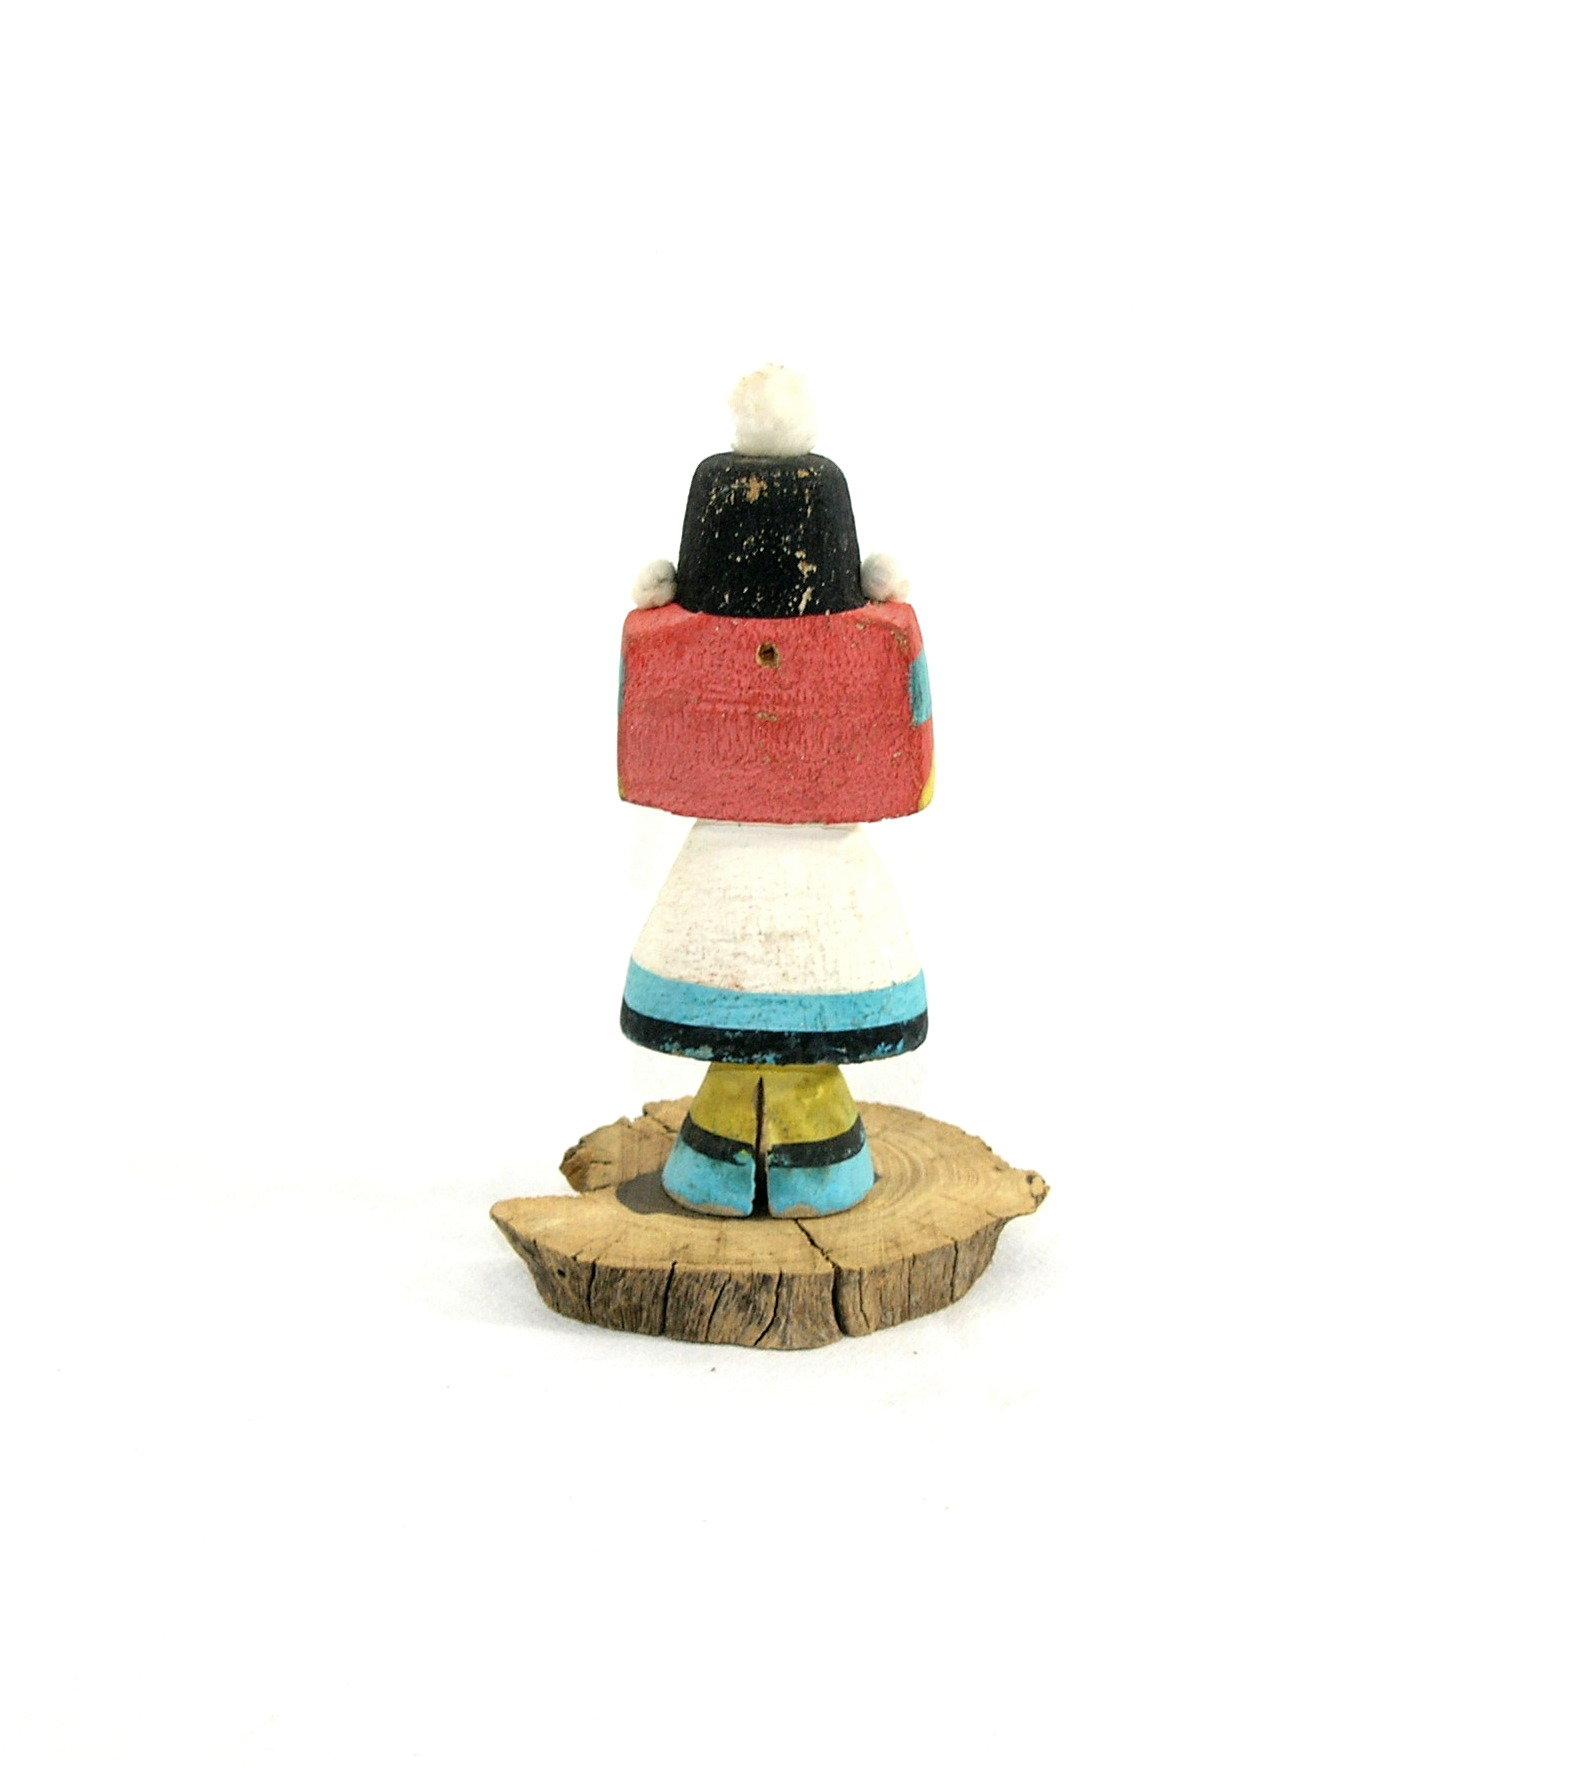 Native American Pueblo Indian Wooden Kachina Doll.   6" Tall